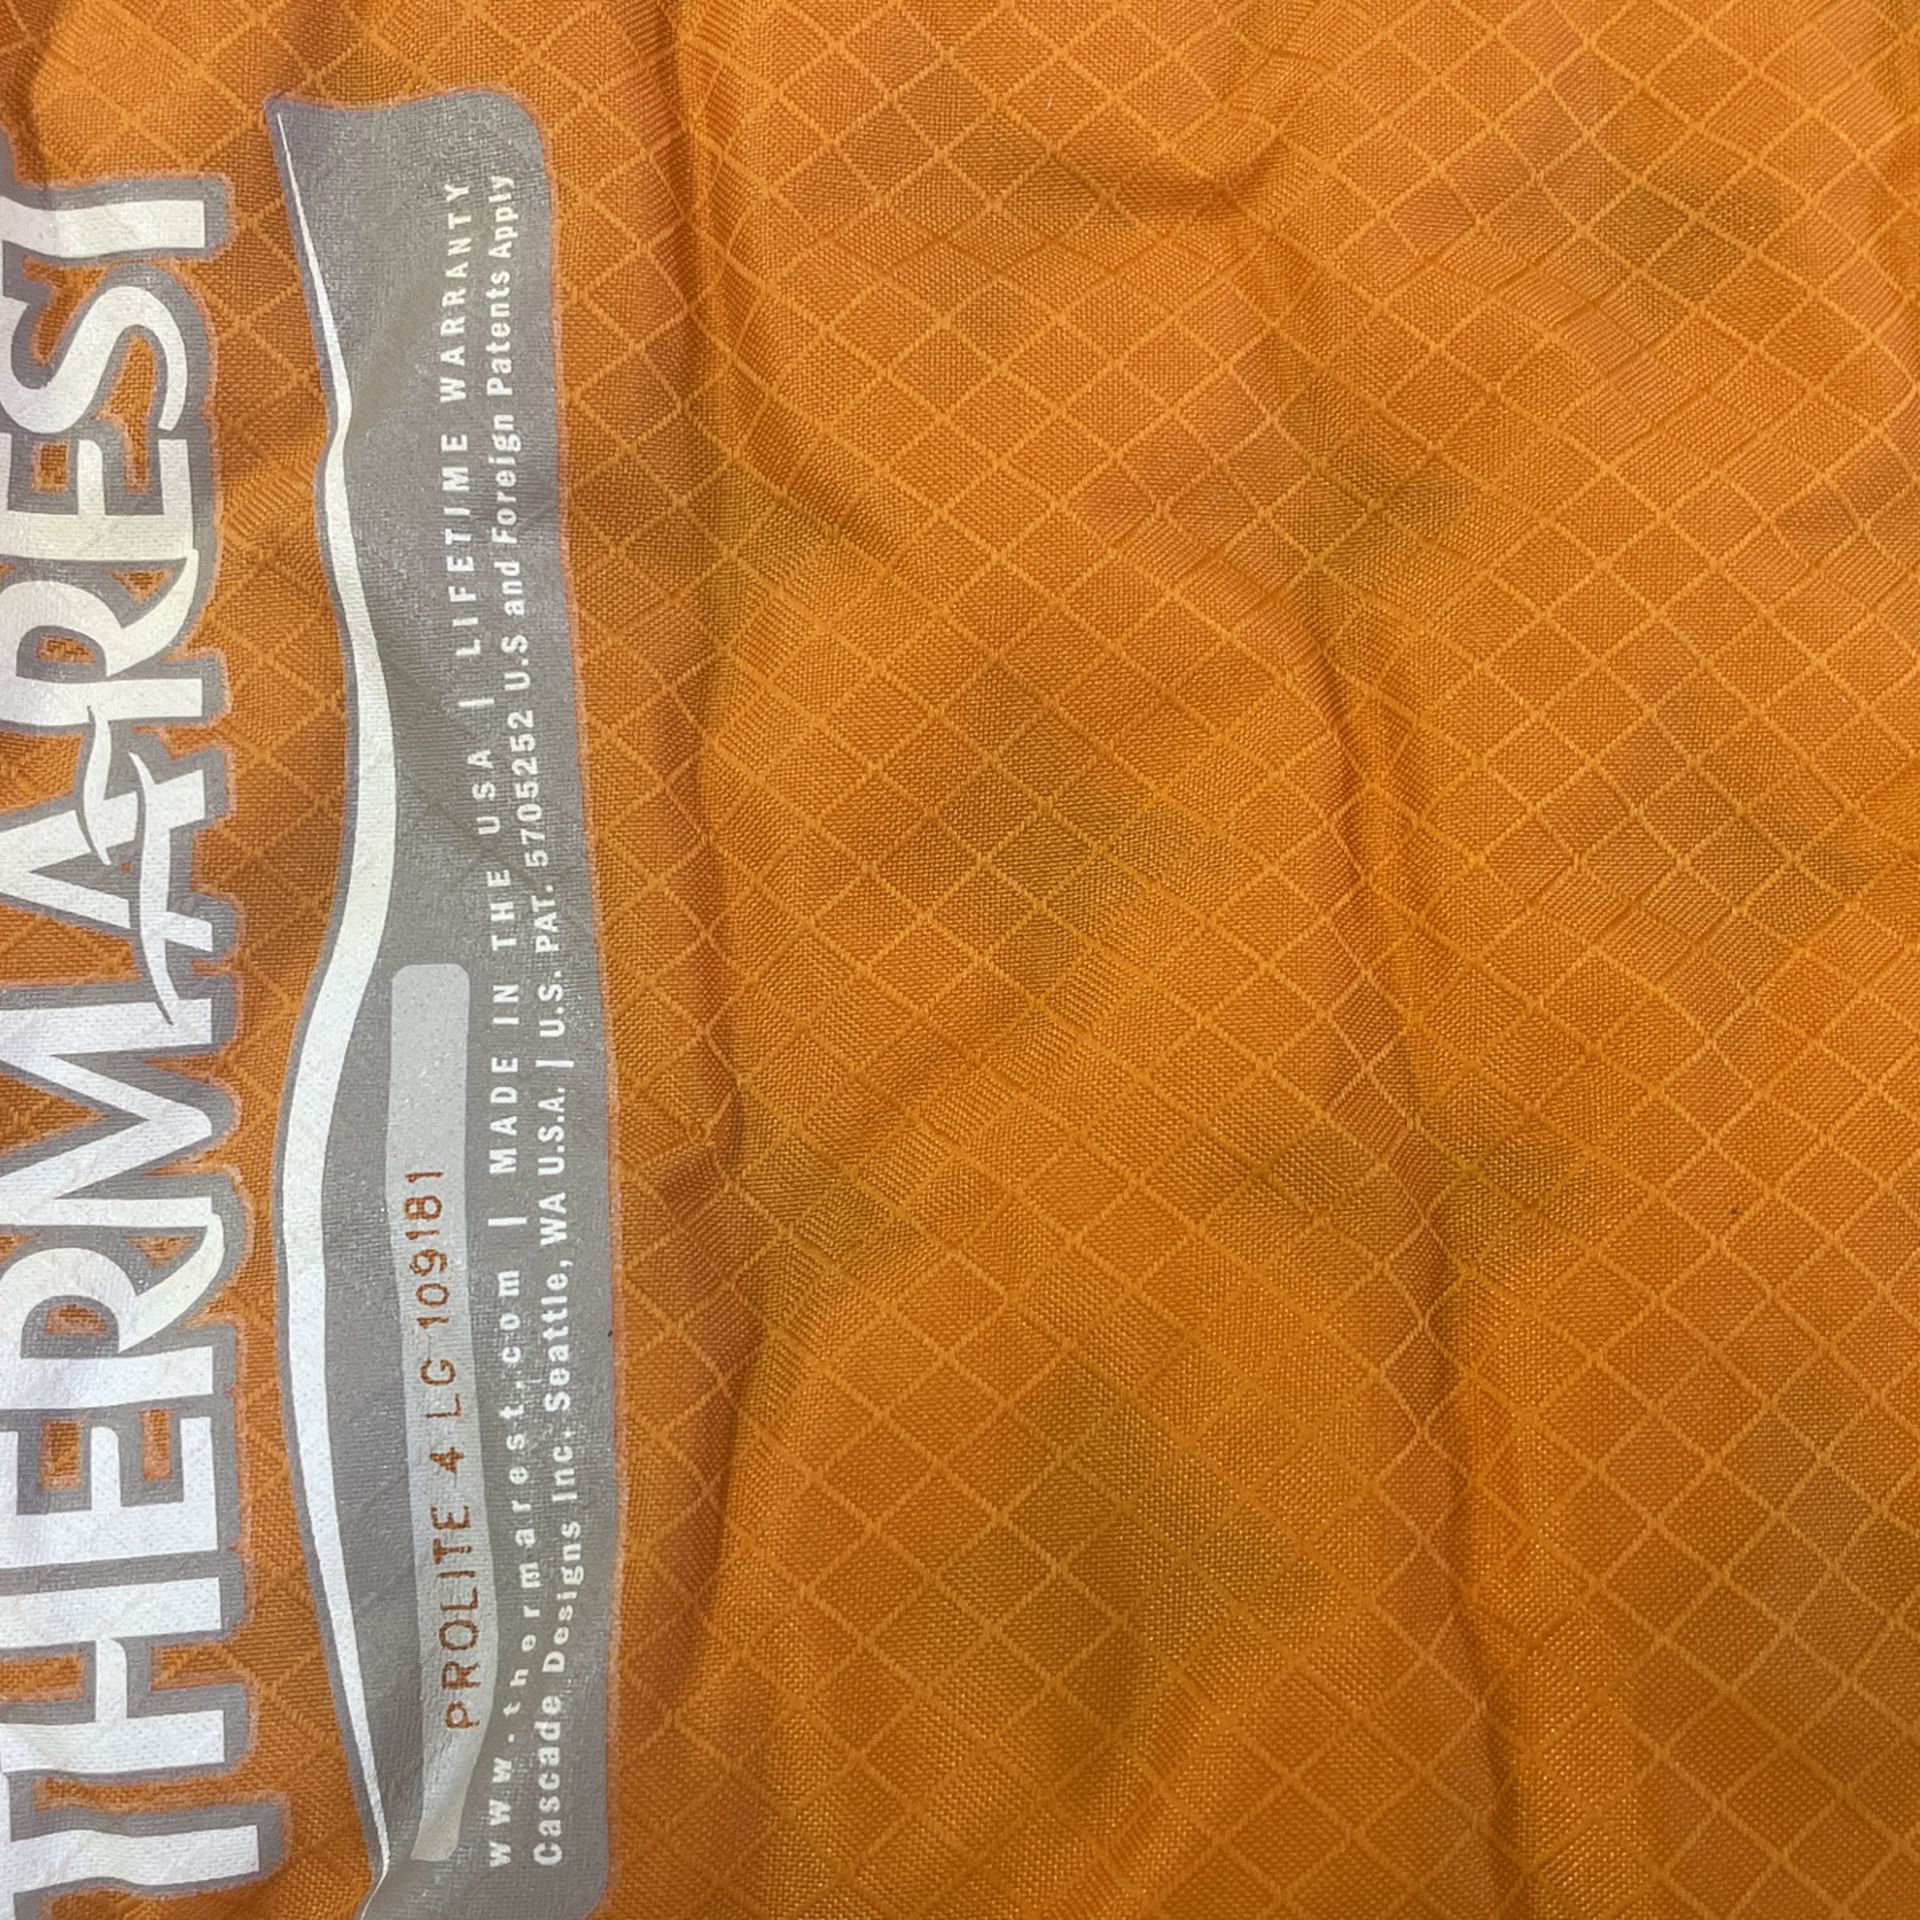 Thermarest Air Mattress Large + Pillow / Case 